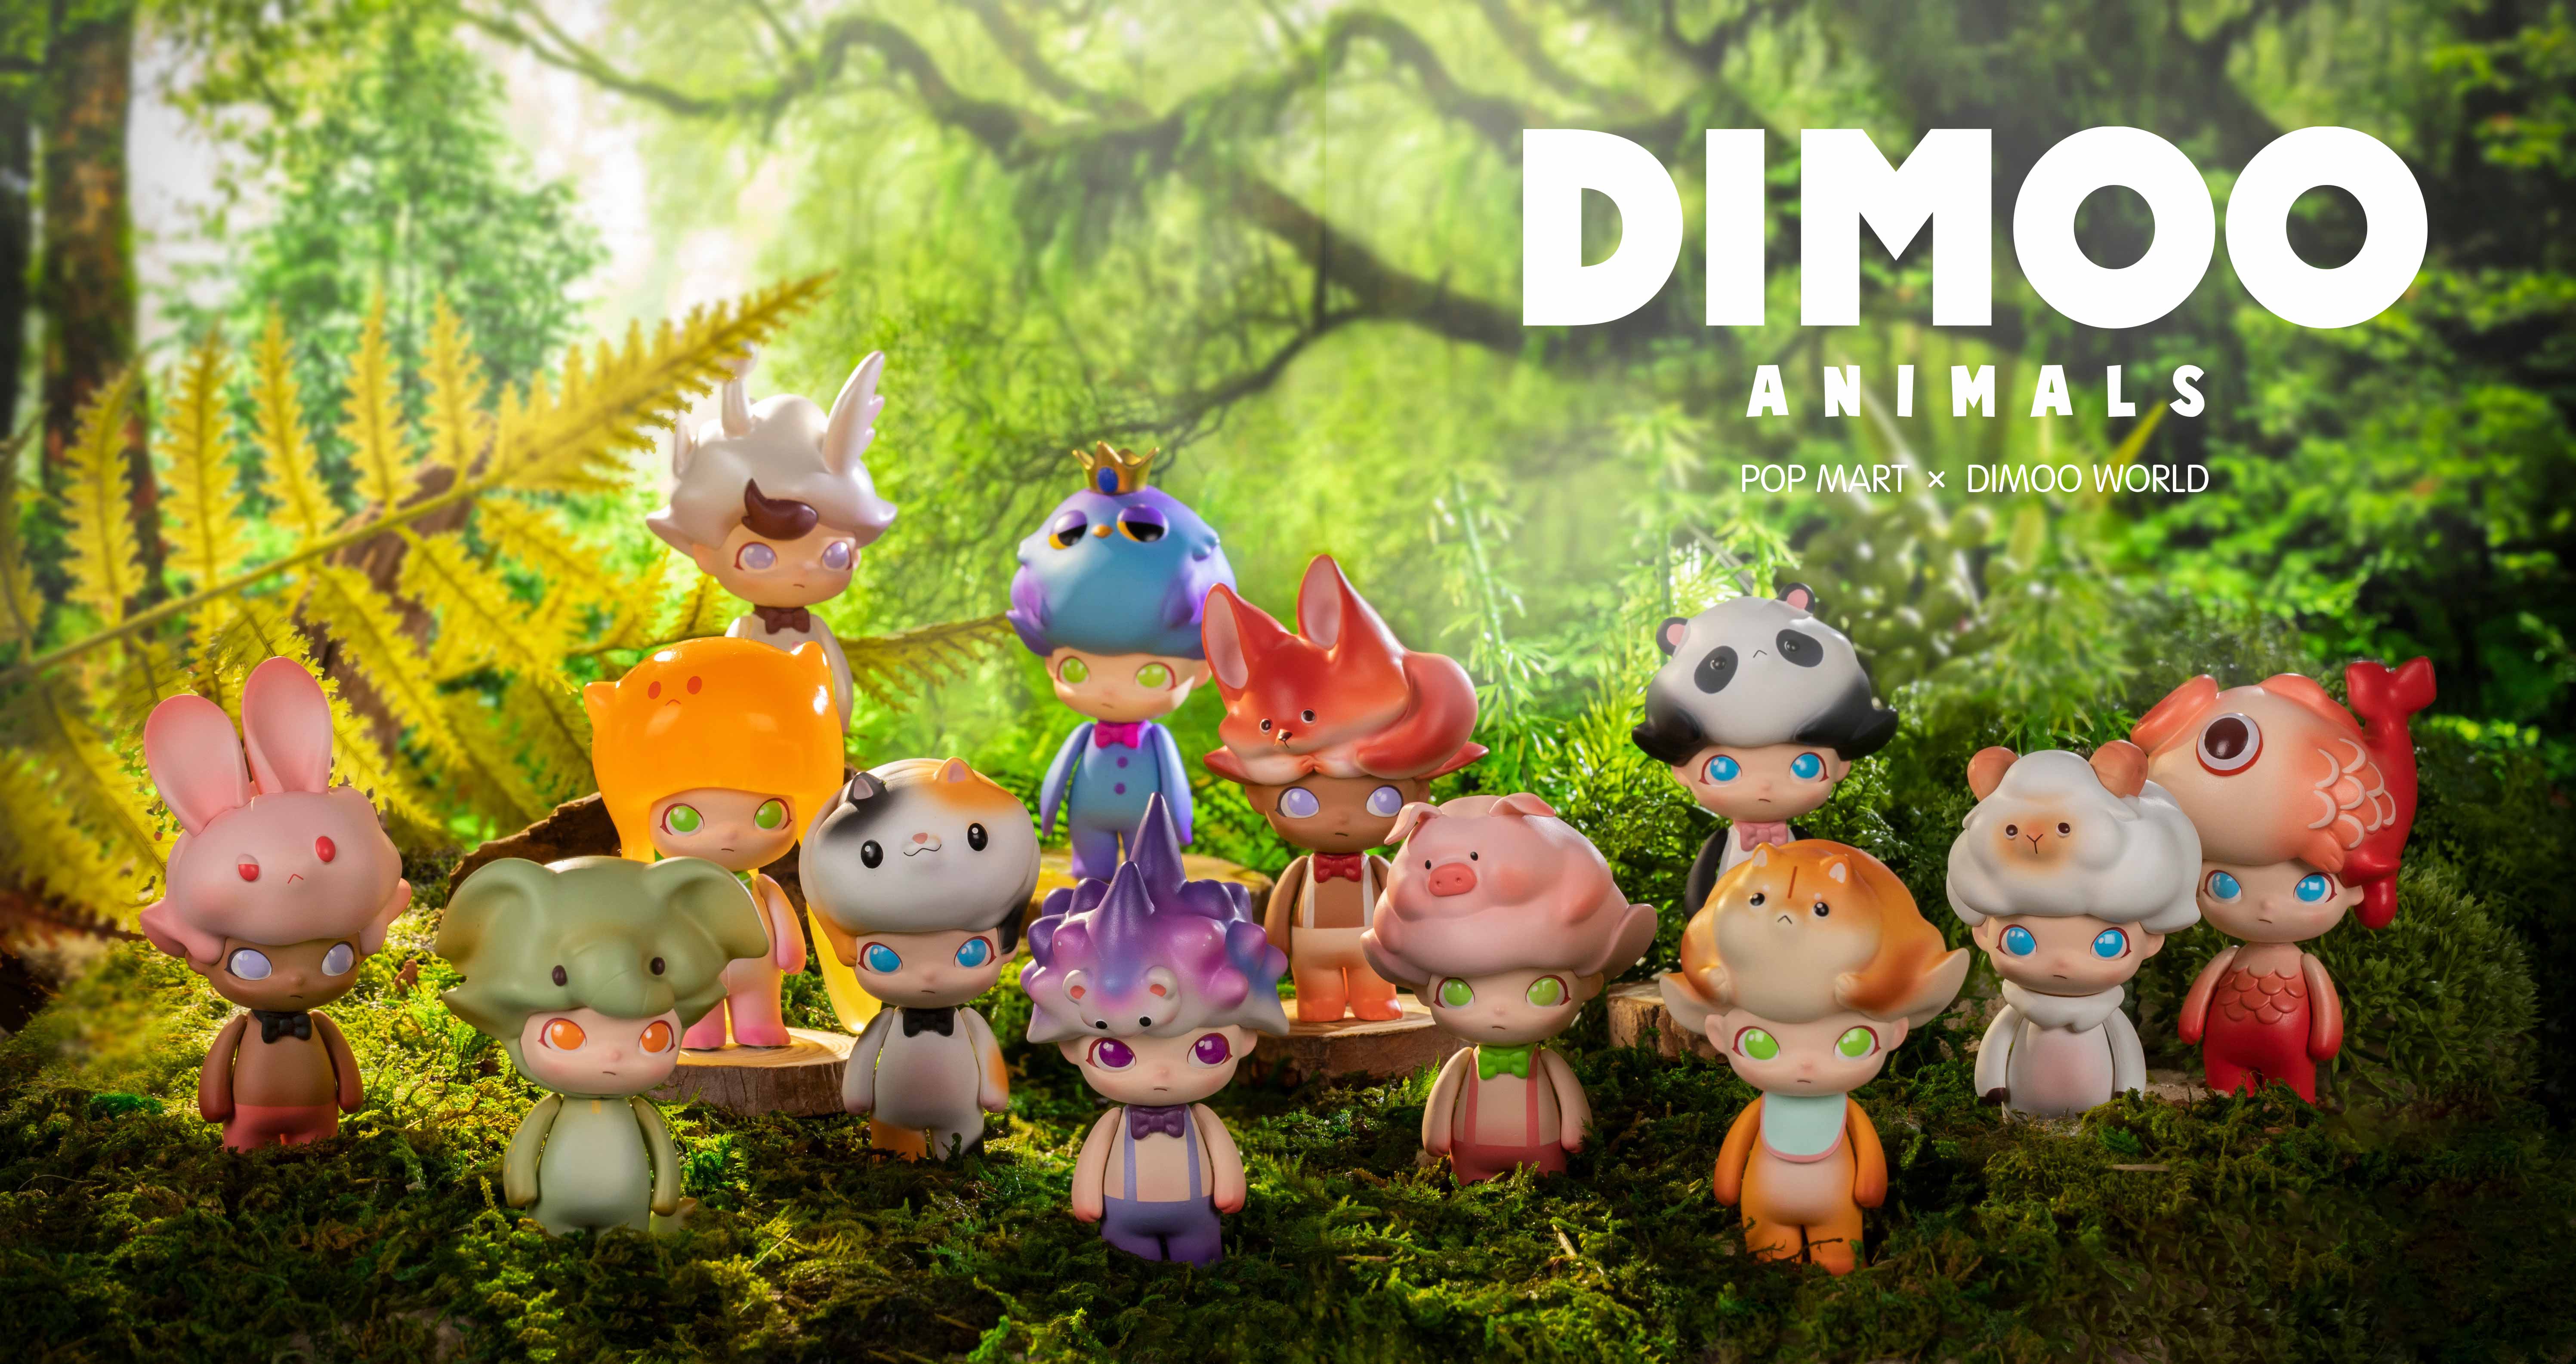 Dimoo Animals Mini Series by Ayan x Pop Mart: Toy figurines of cartoon characters in a forest setting.